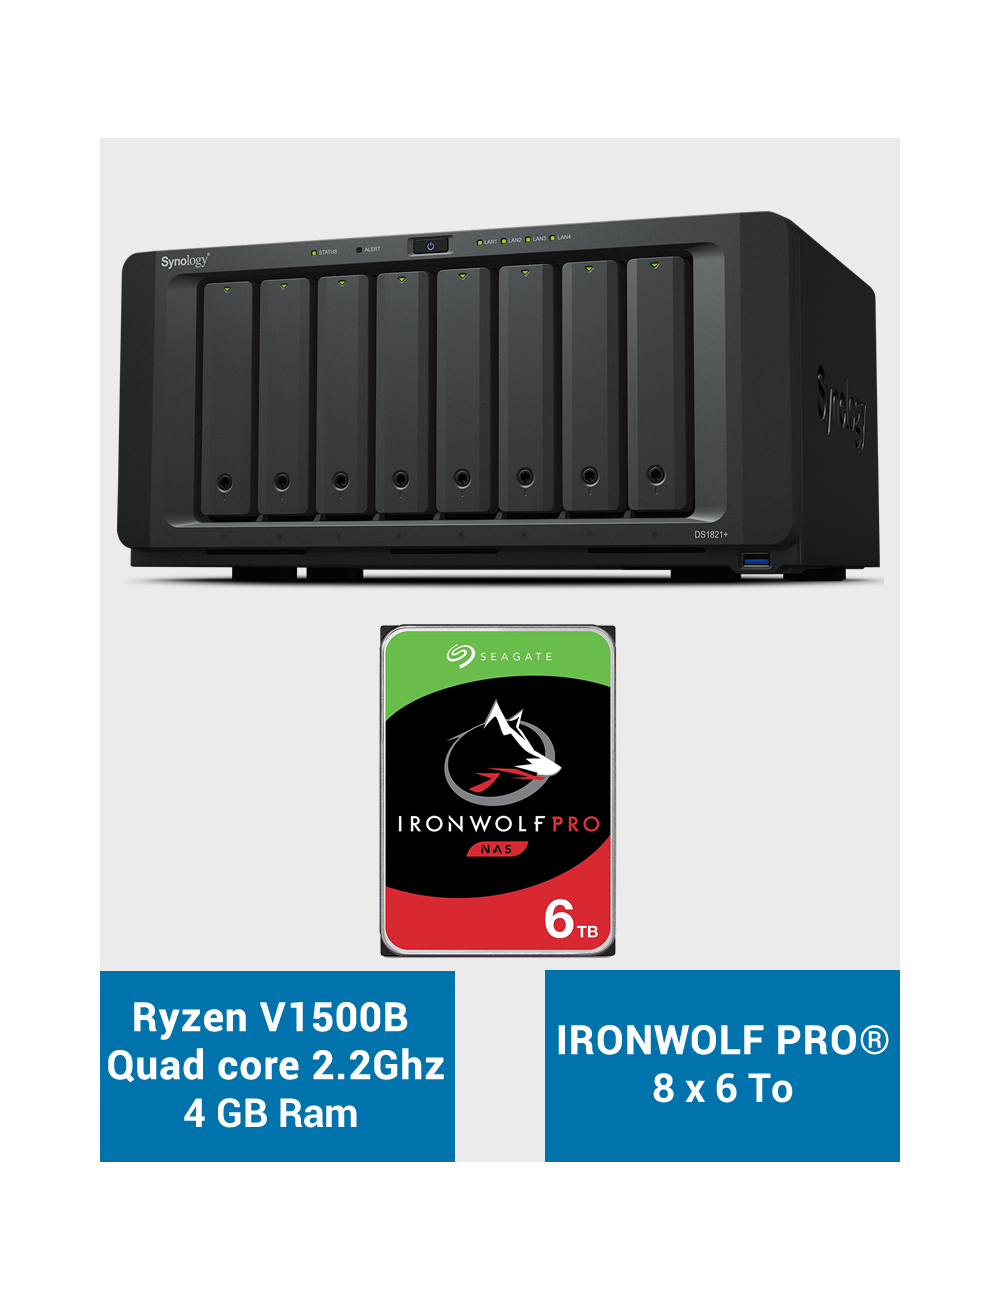 Synology DS1821+ Serveur NAS 8 baies IRONWOLF PRO 48To (8x6To)